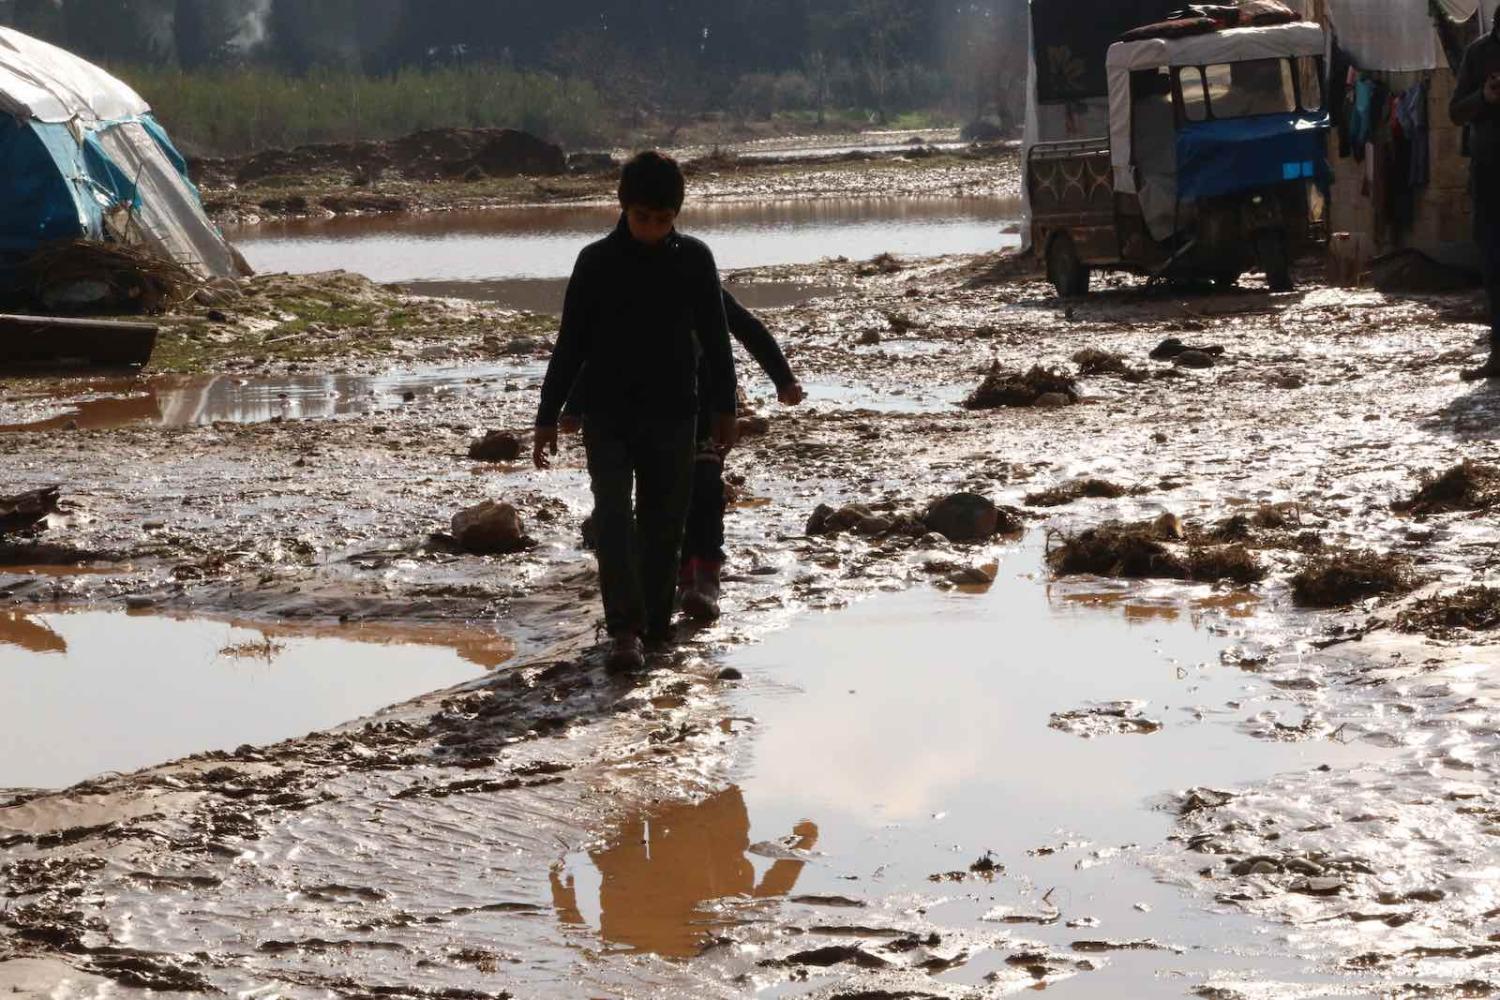 Flooding at a camp in Syria’s north-western Afrin province on 31 January (Muhammed Abdullah/Anadolu Agency via Getty Images)